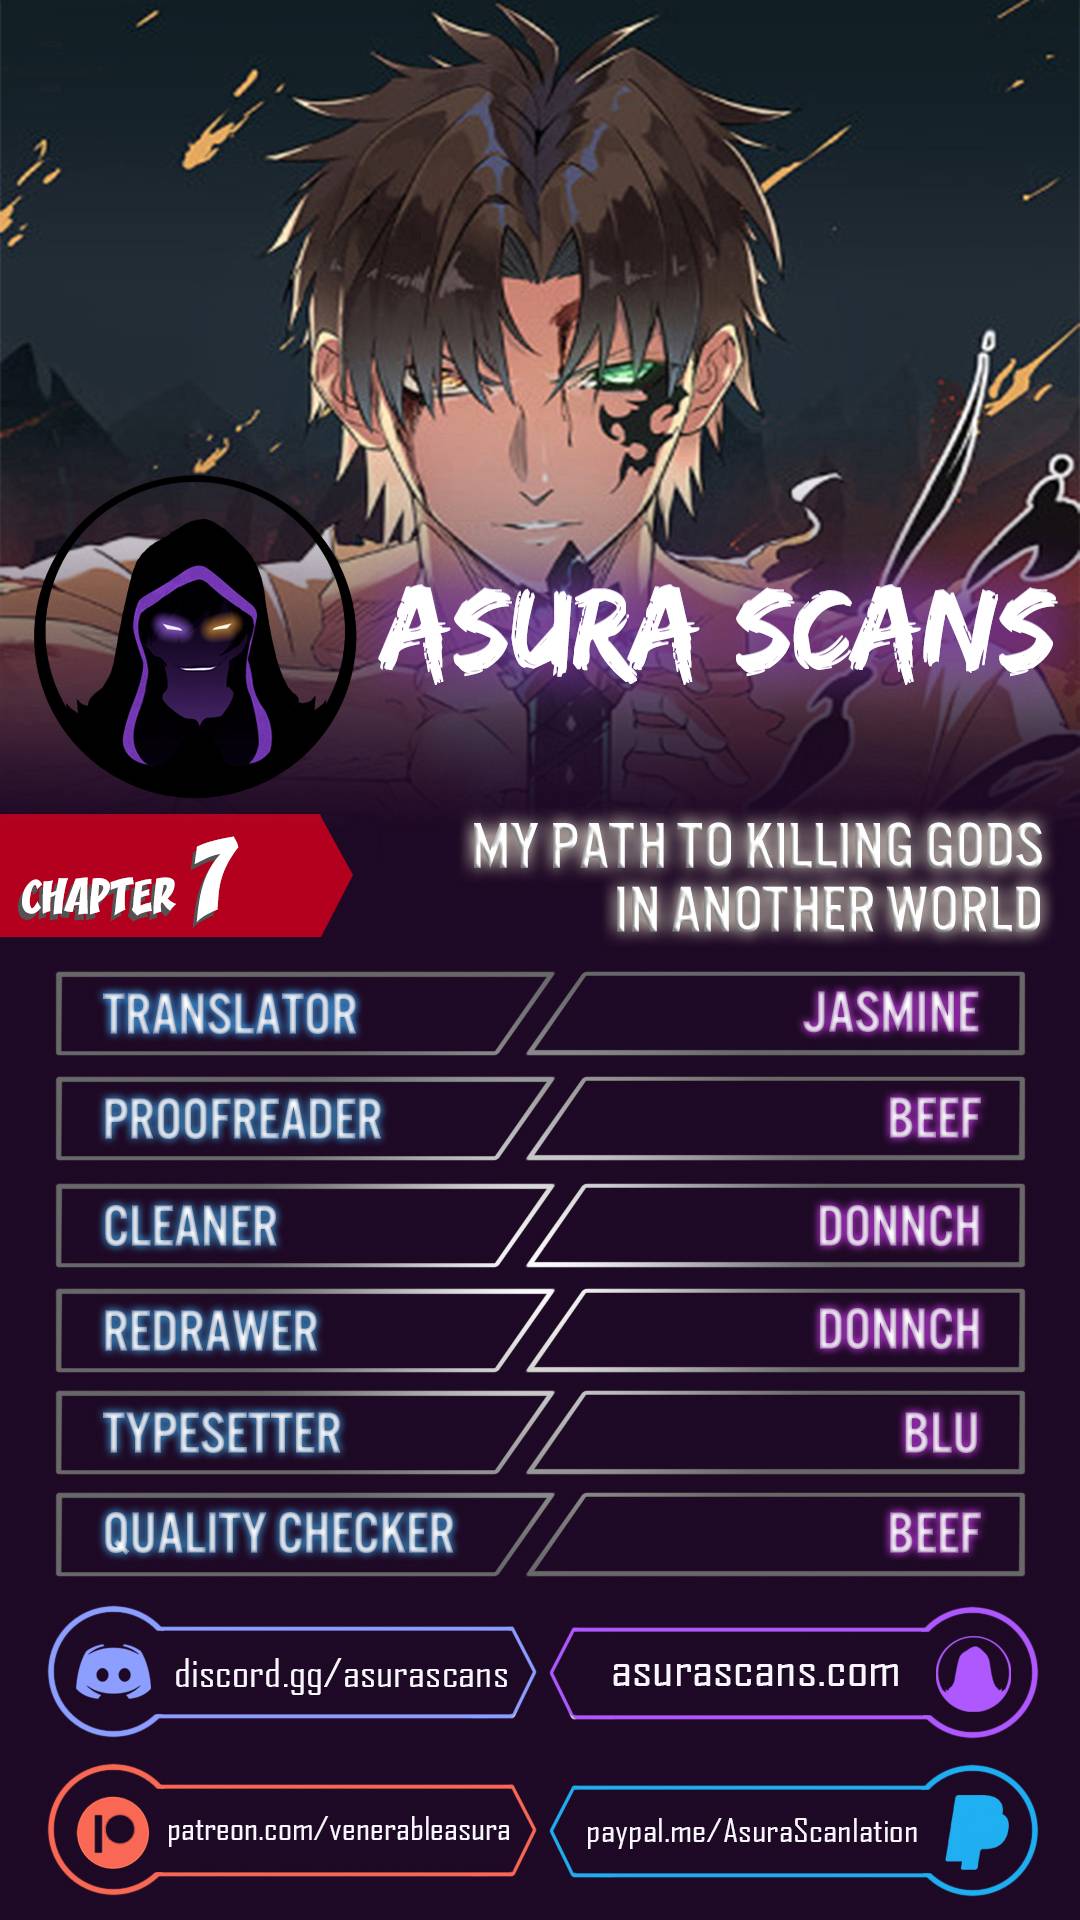 My Way Of Killing Gods In Another World Chapter 7